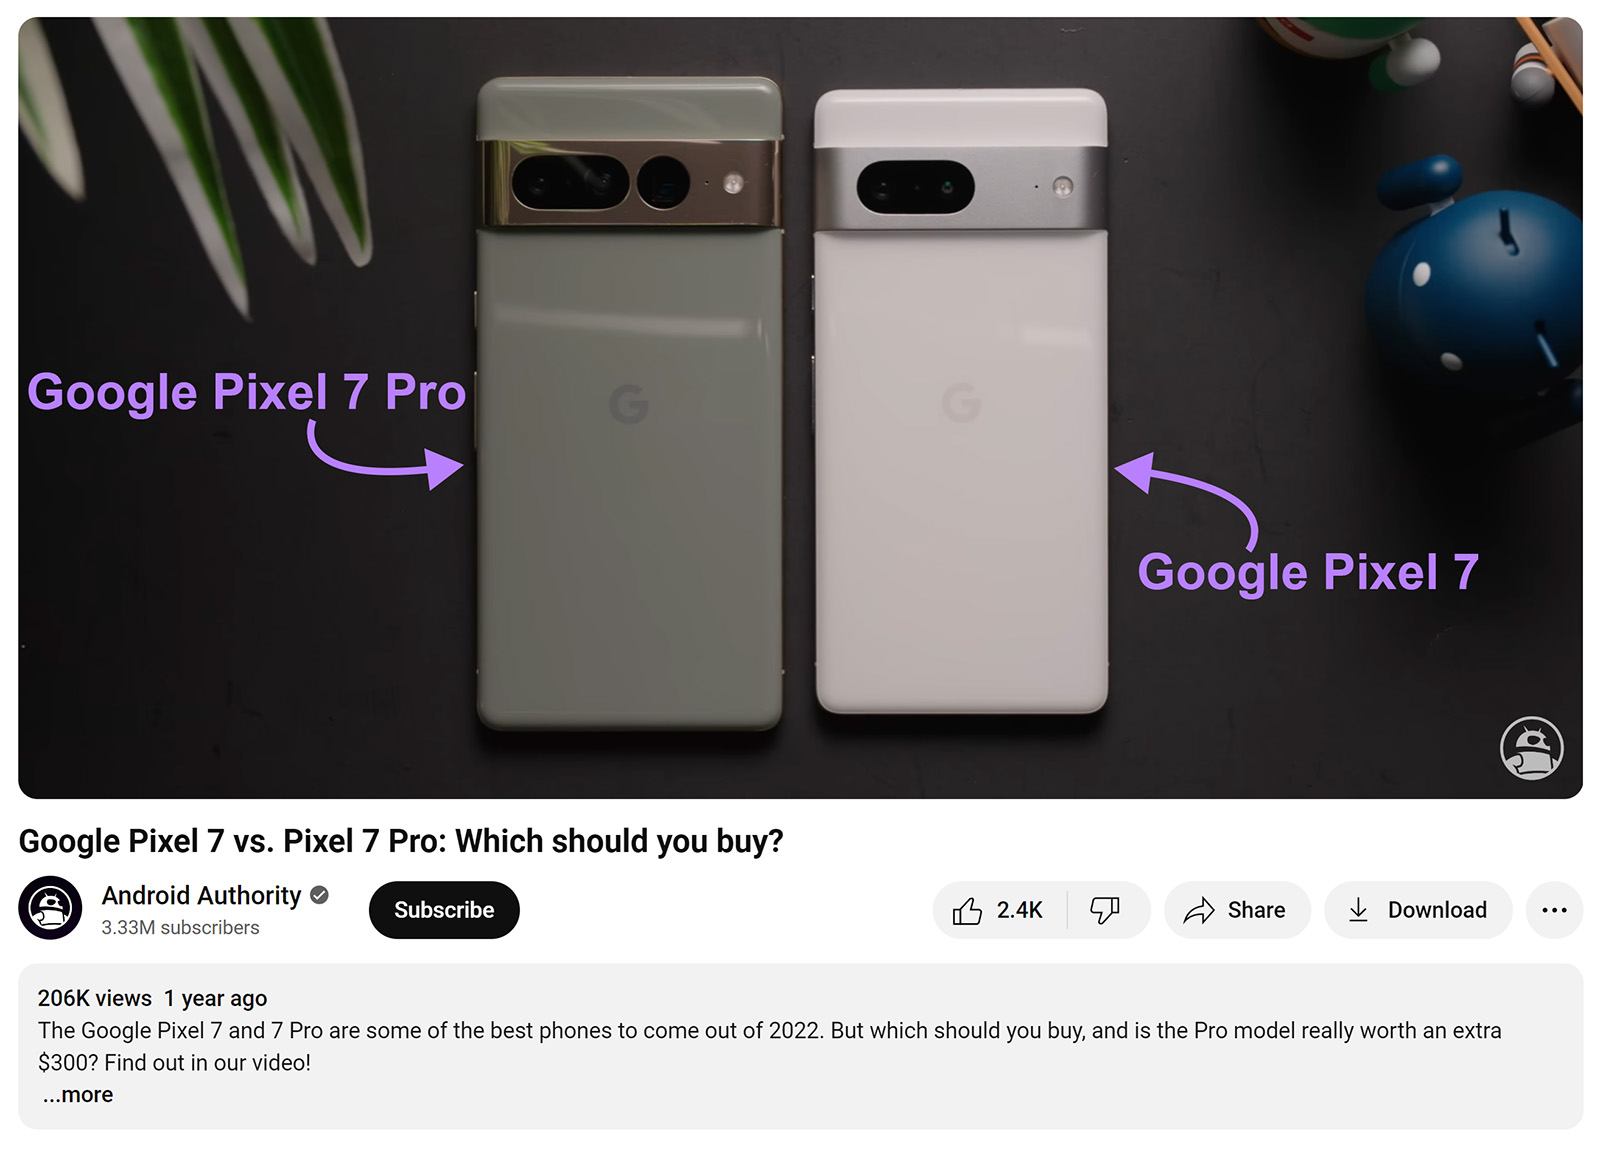 Android Authority video with annotations pointing to Google Pixel 7 Pro and Google Pixel 7 phones in video.